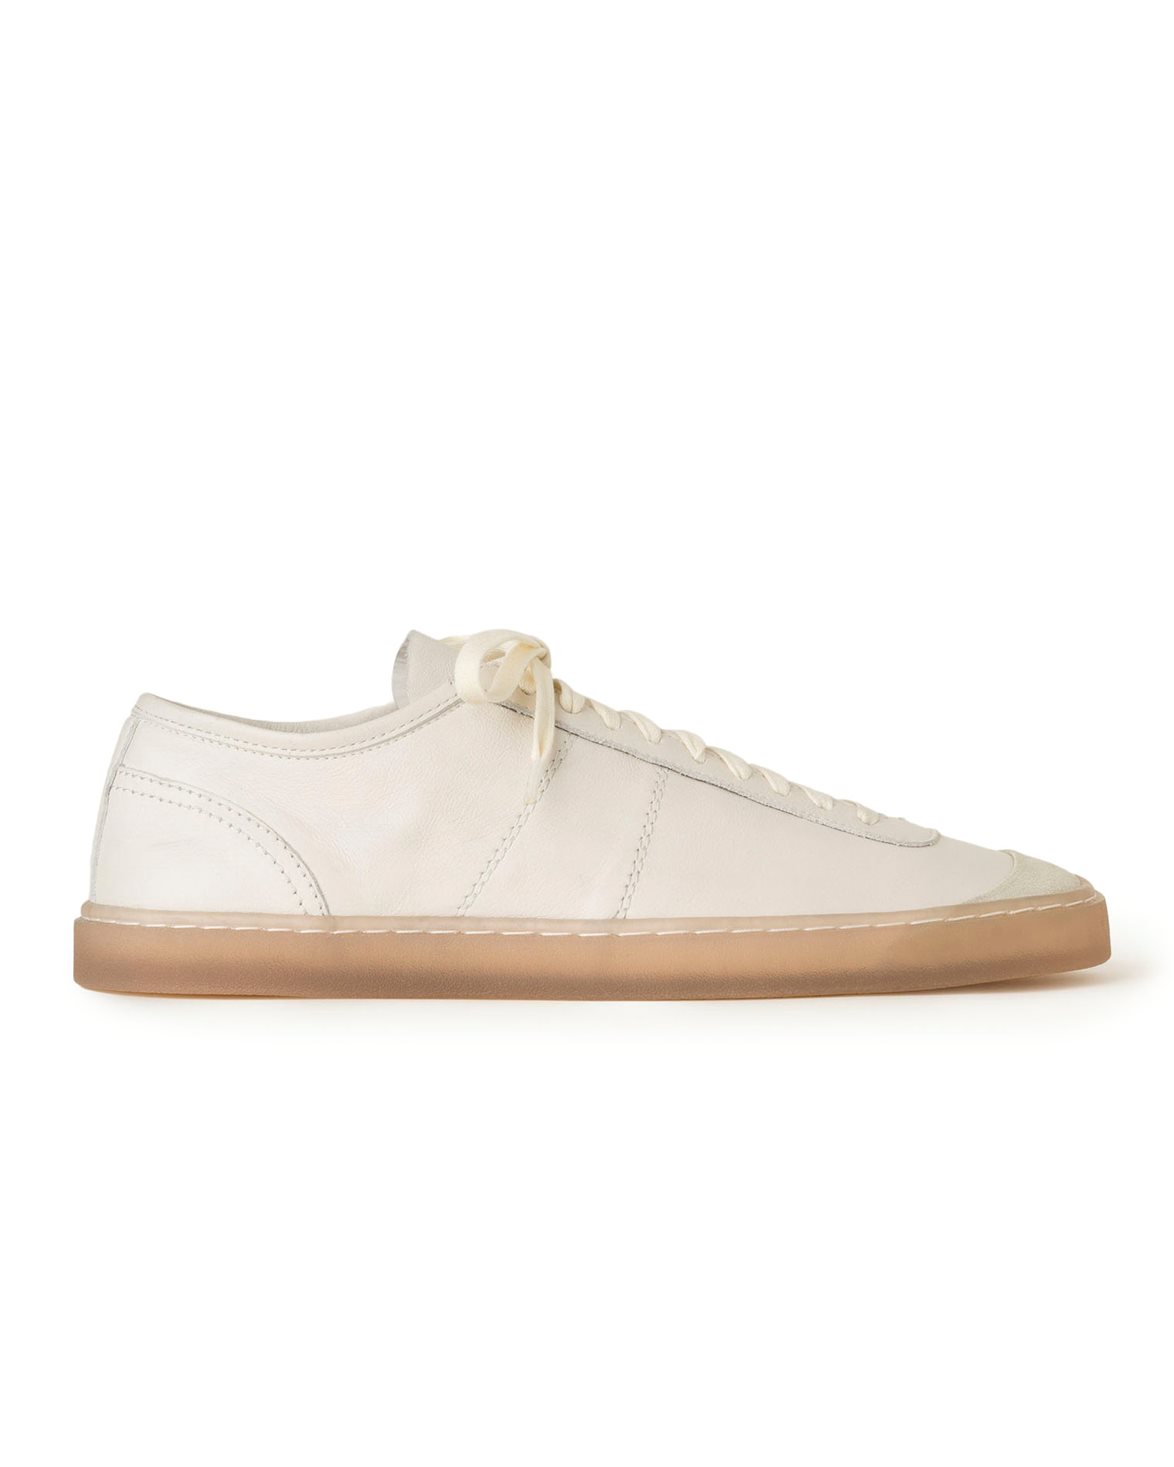 https://02.cdn37.se/ak1/images/2.814134/lemaire-linoleum-basic-laced-up-trainers-w-clay-white.jpeg